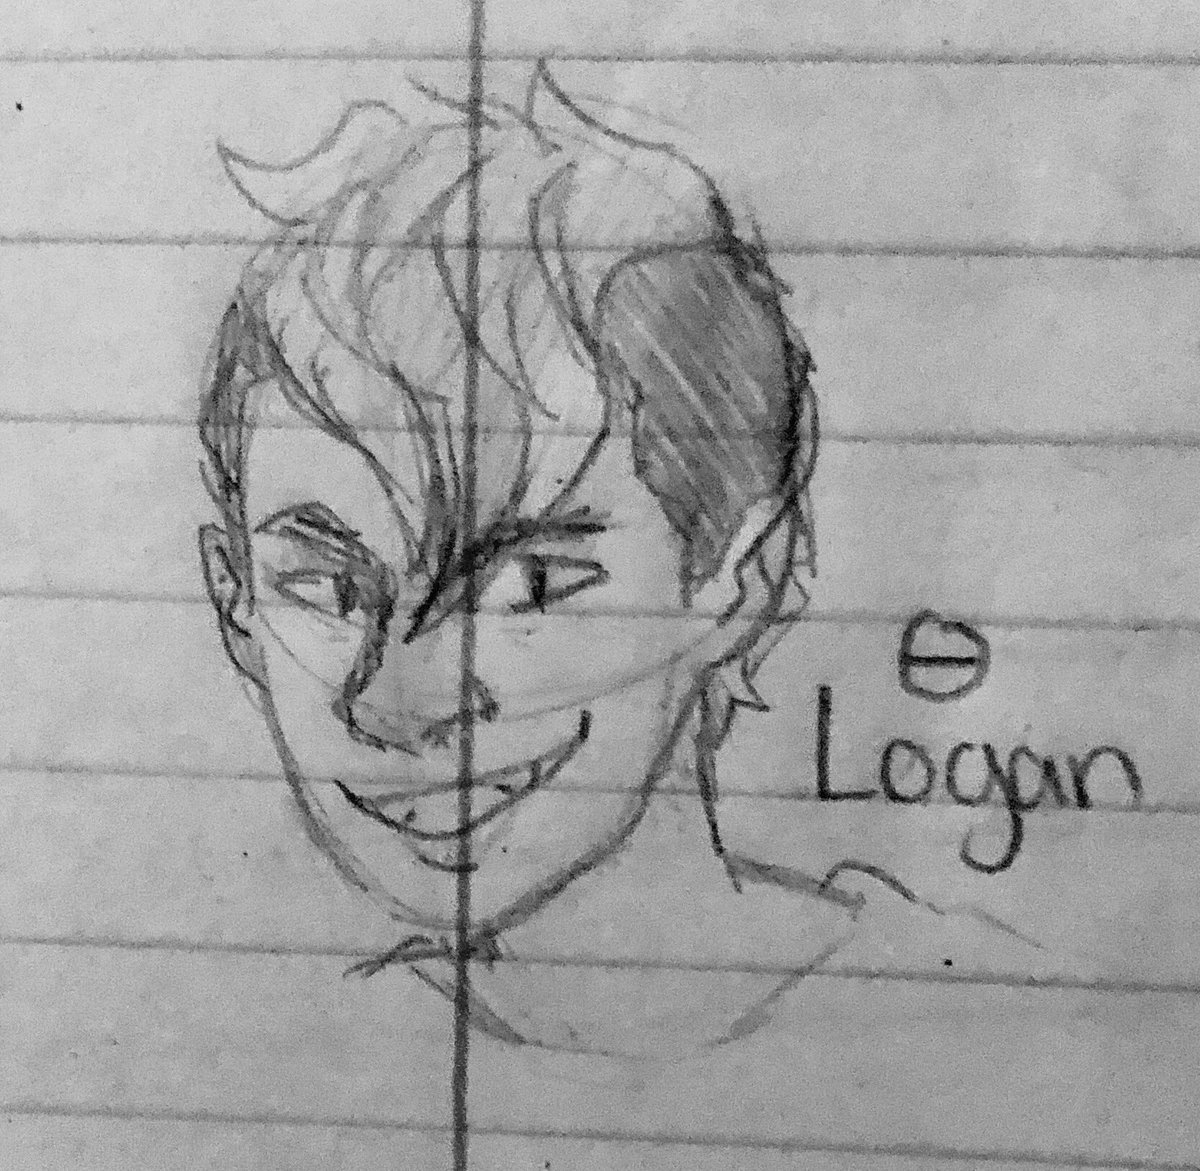 Was digging through some old notebooks and found what I think are some of the oldest drawing I still have of my OC Cyrus (formerly Logan) and comparing them to what his design is like now..... wow 